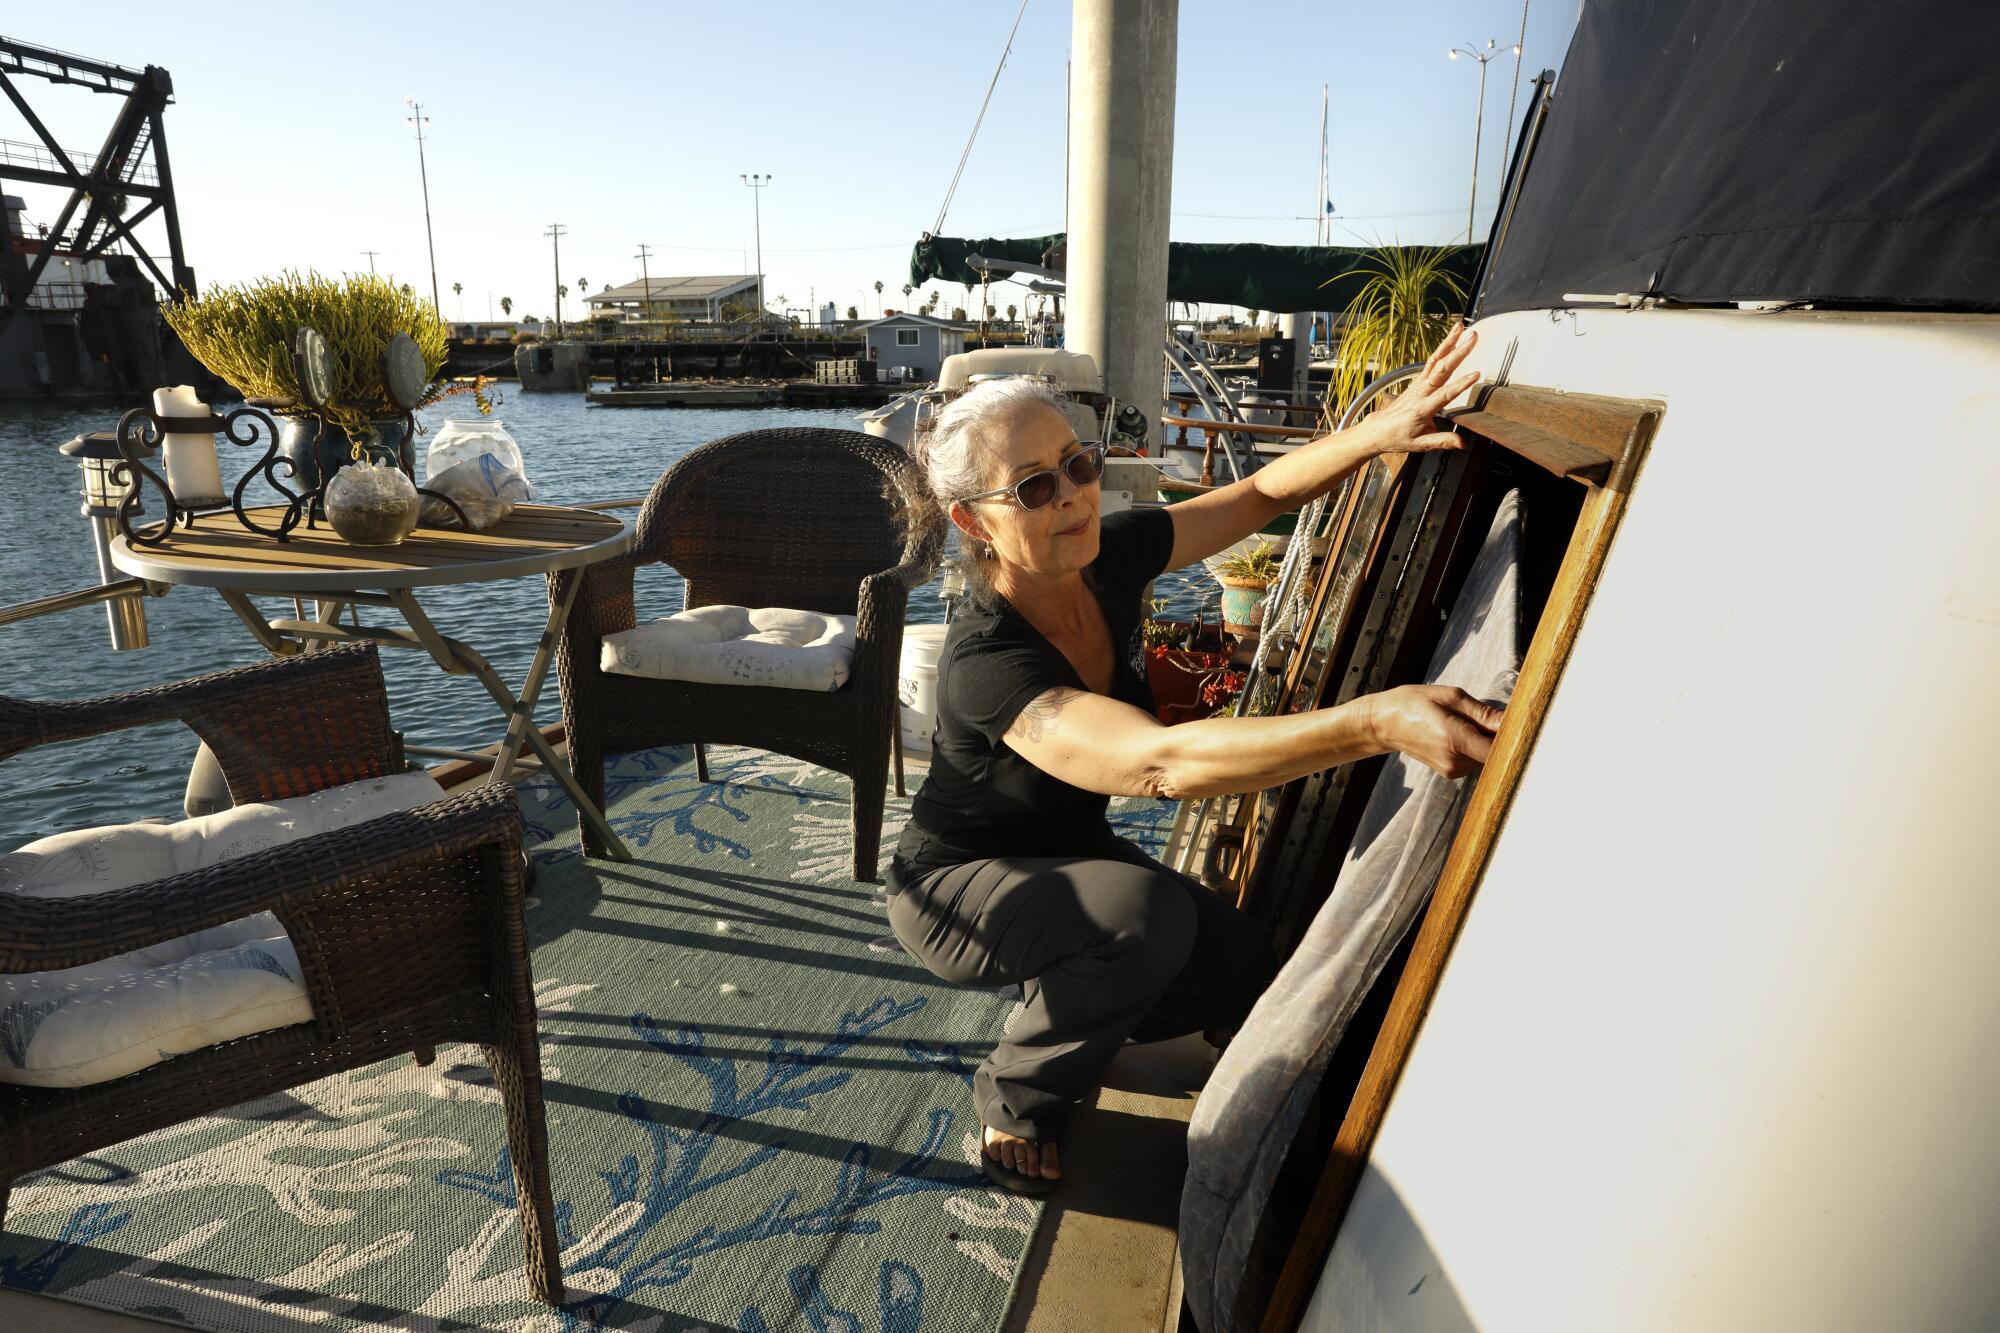 Nyla Olsen lives on a yacht in Leeward Bay Marina where the Dominguez Channel empties into the Los Angeles Harbor.